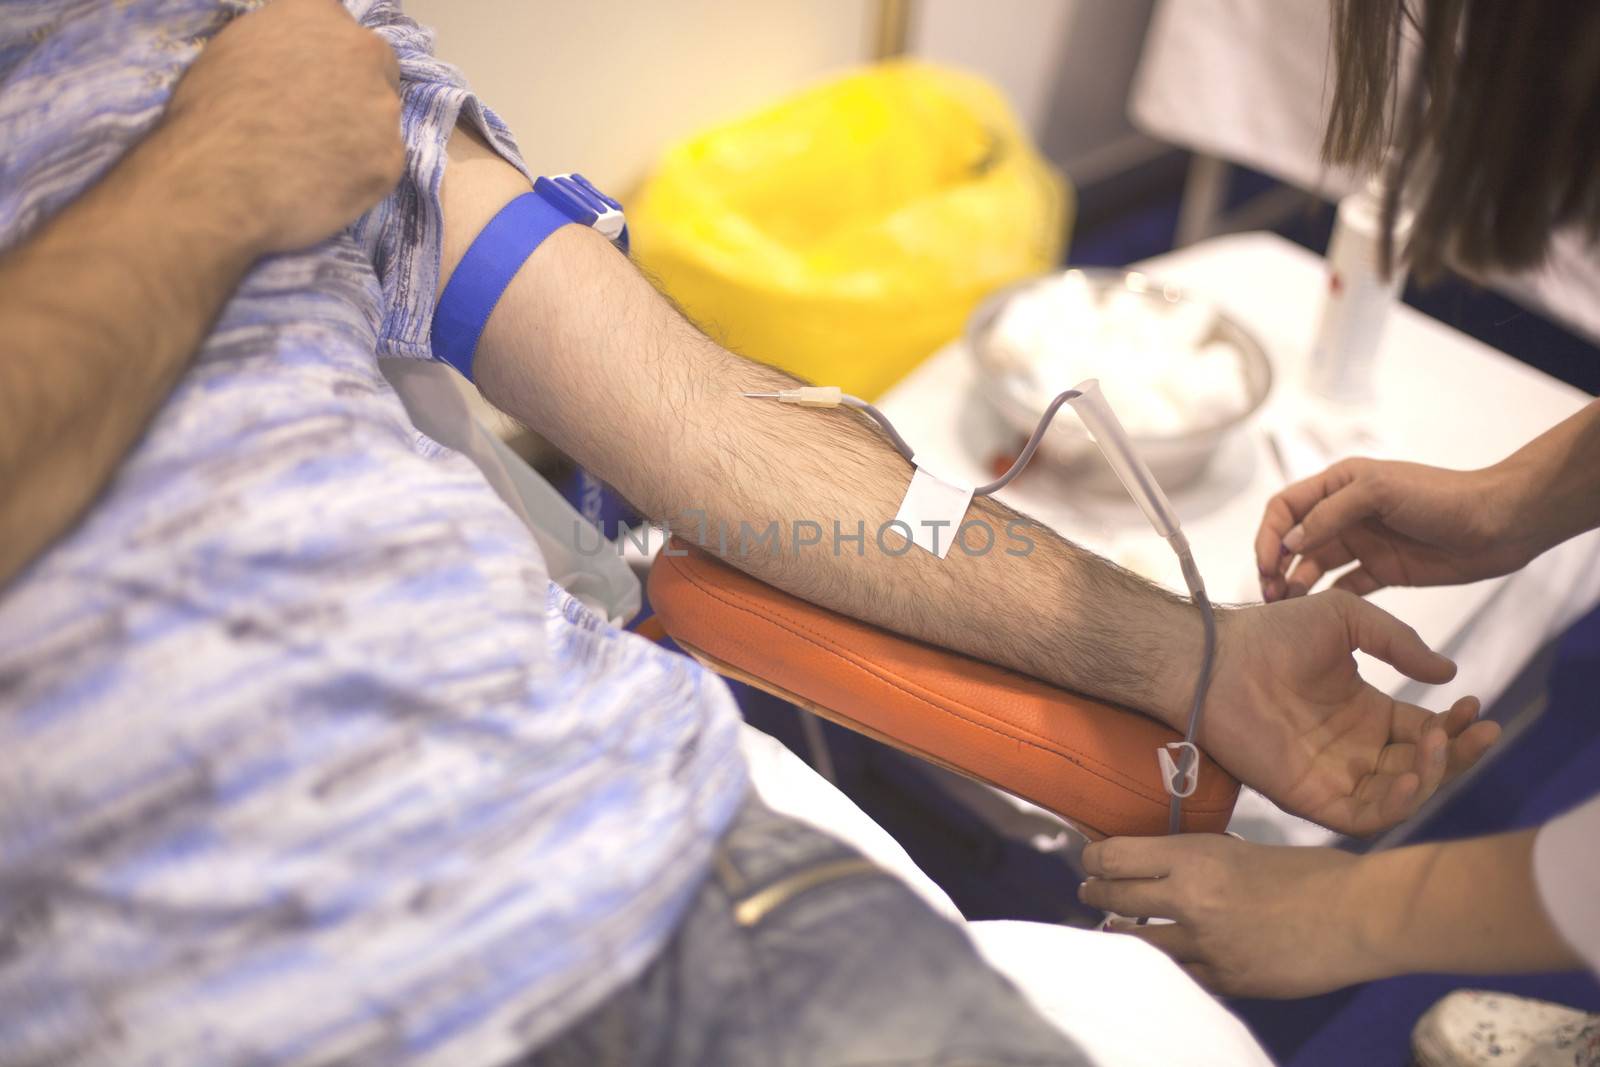 Blood donor's arm up close while giving blood